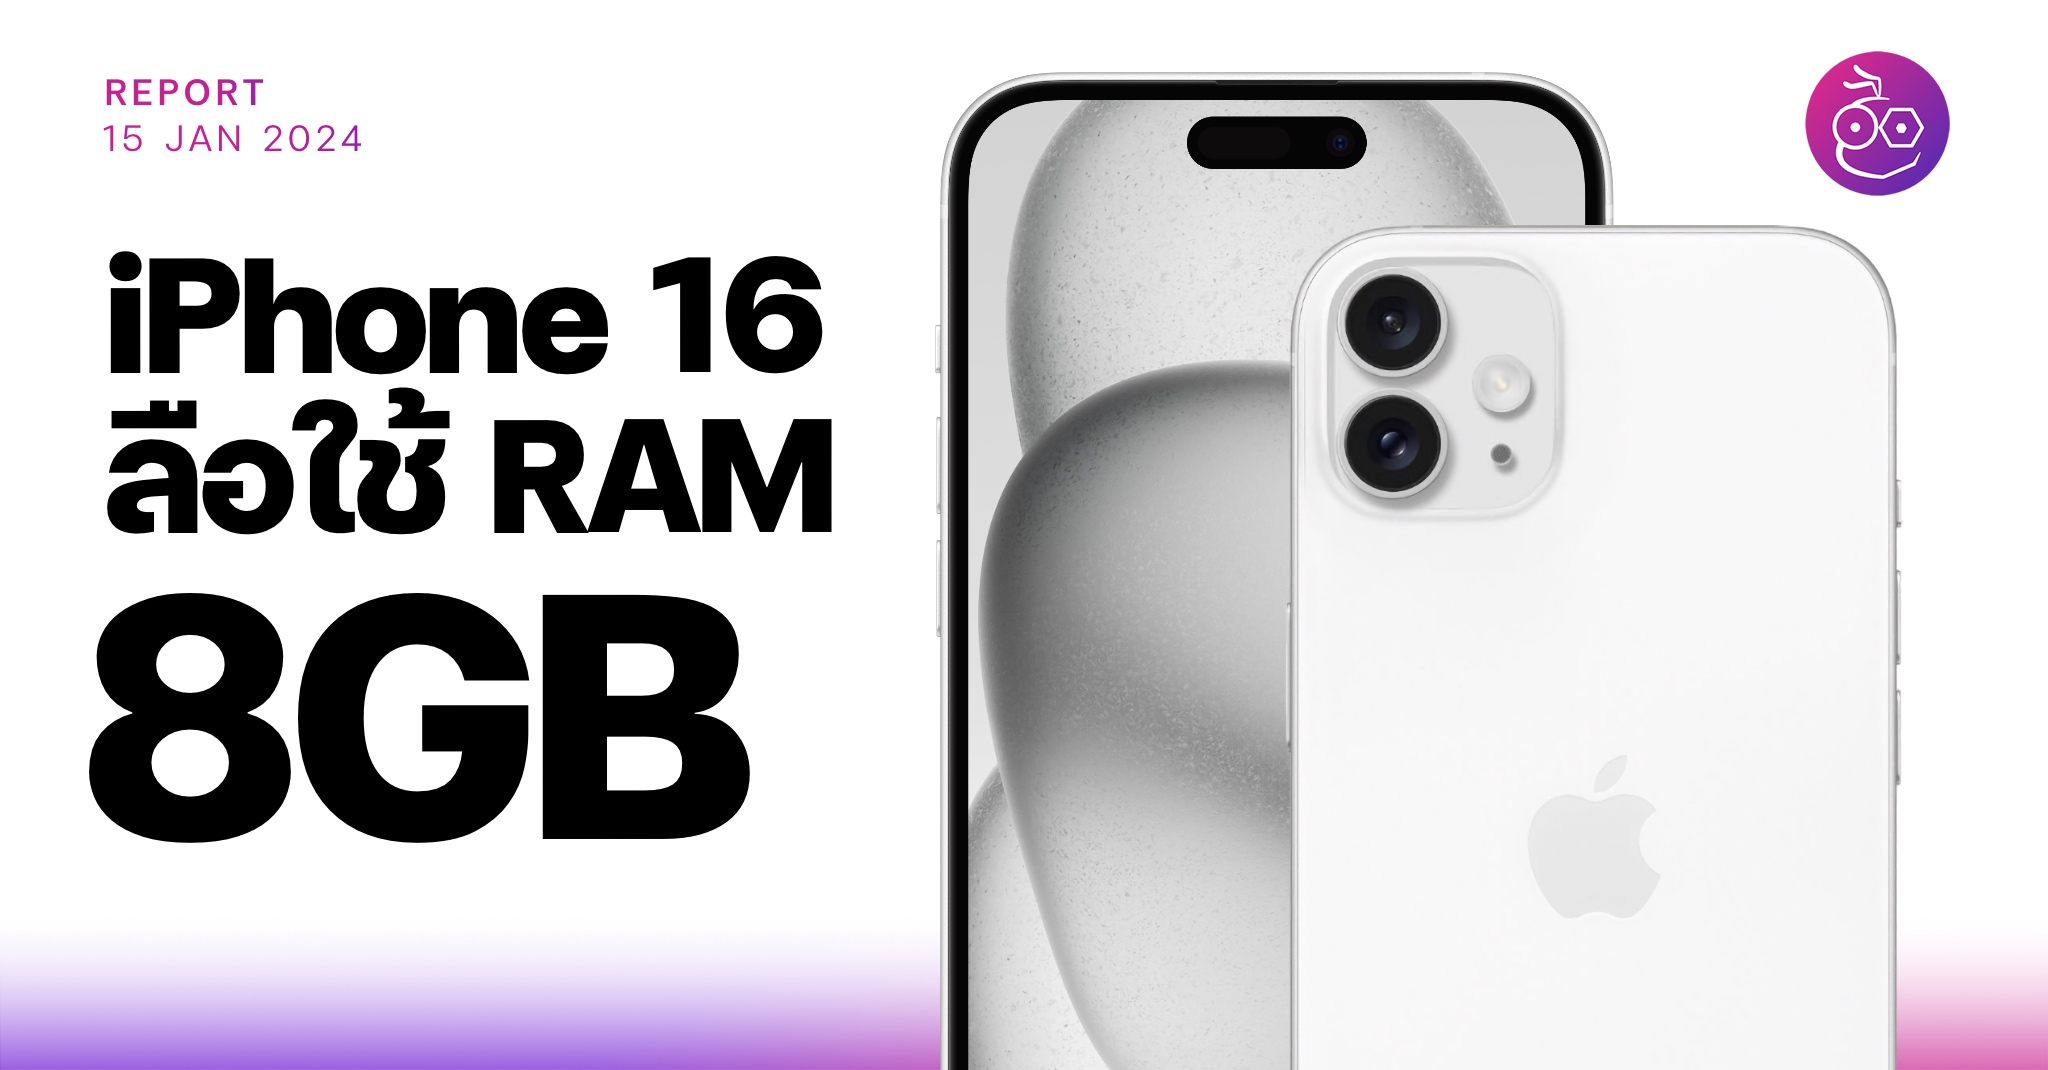 Rumour: iPhone 16 and iPhone 16 Plus will get 8GB RAM and Wi-Fi 6E support